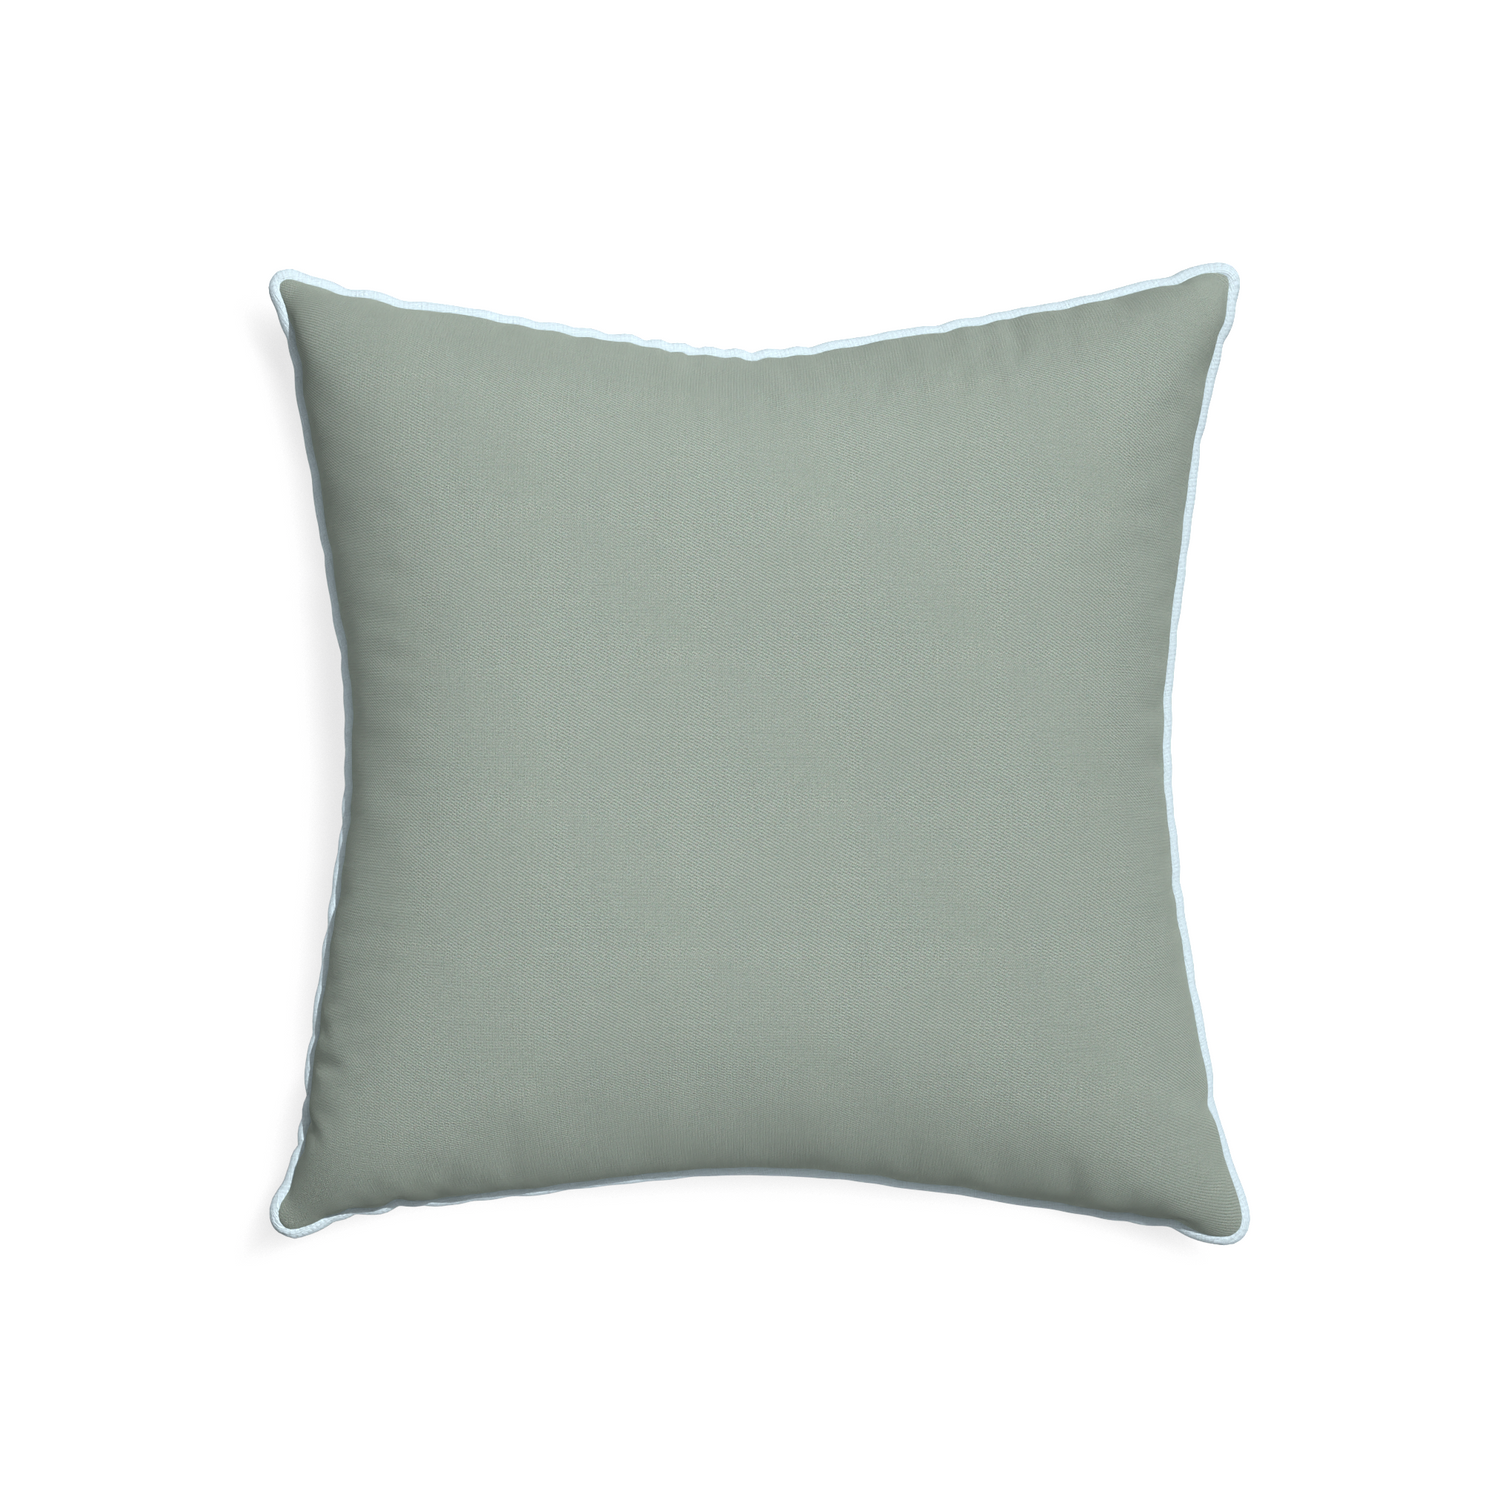 22-square sage custom sage green cottonpillow with powder piping on white background